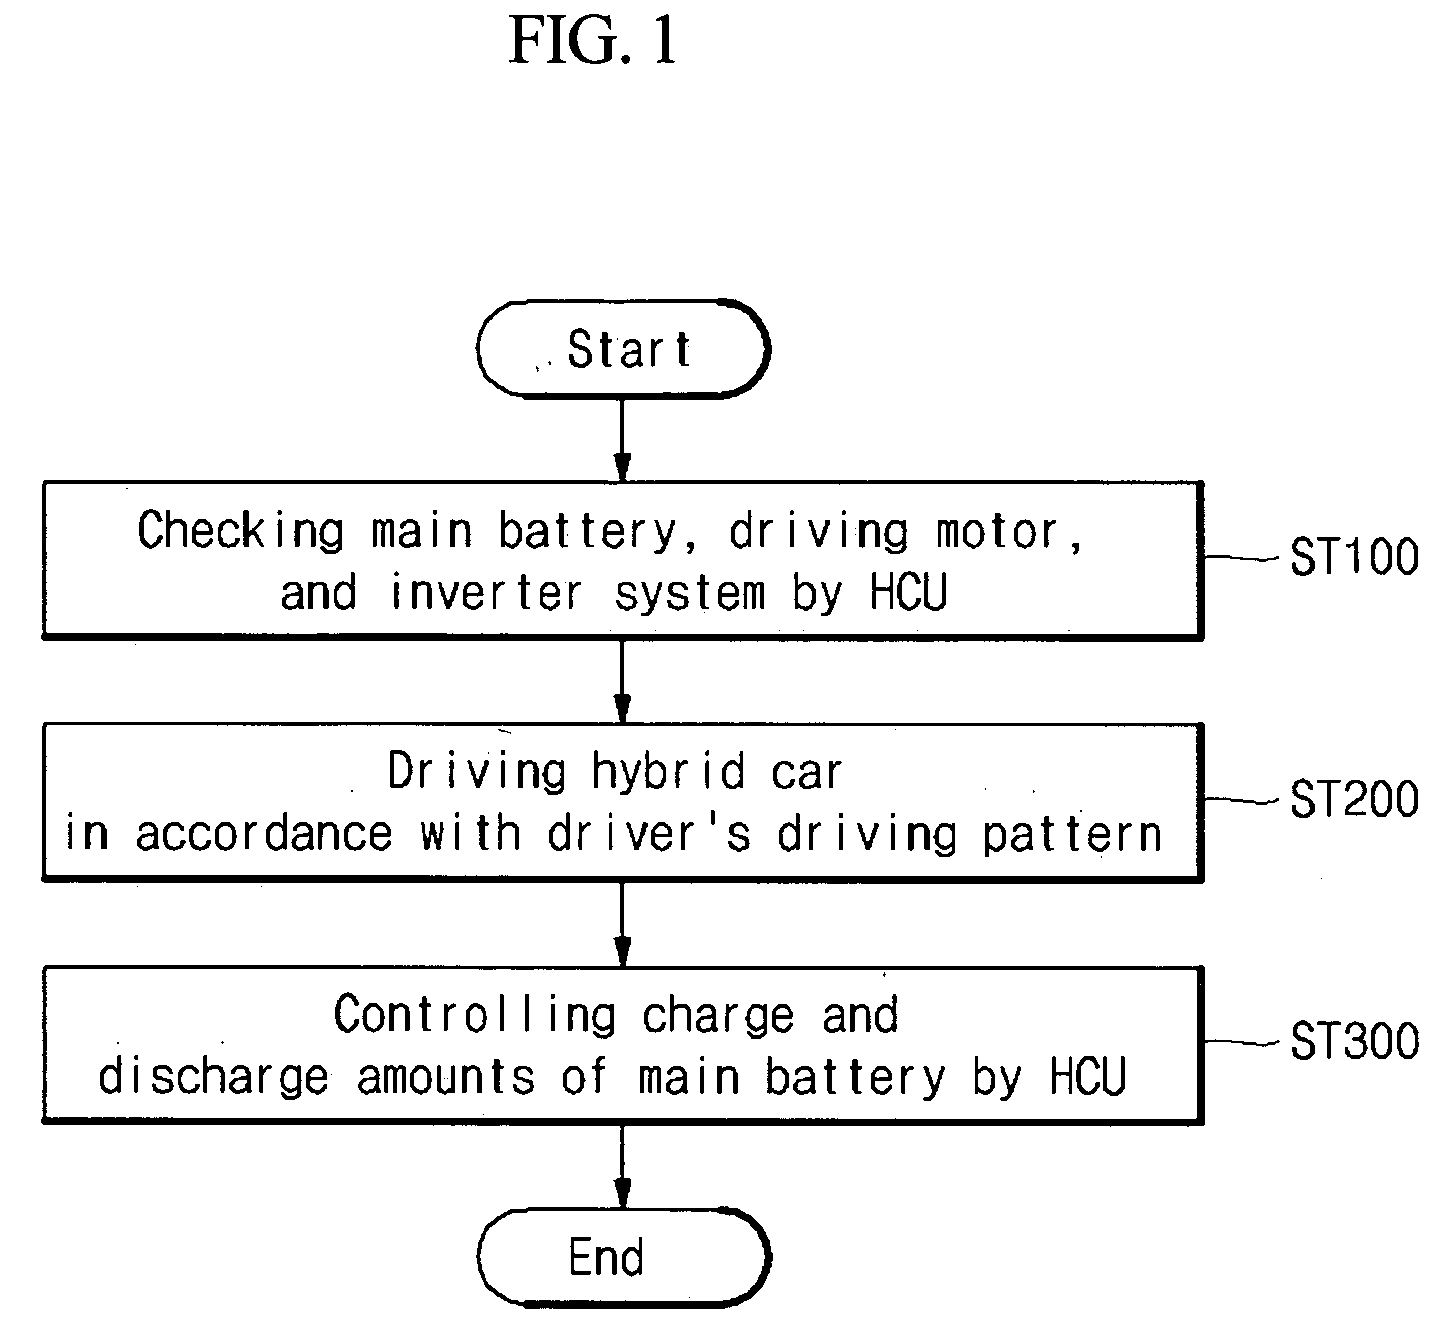 Method and system for controlling charge and discharge amounts of a main battery for a hybrid car